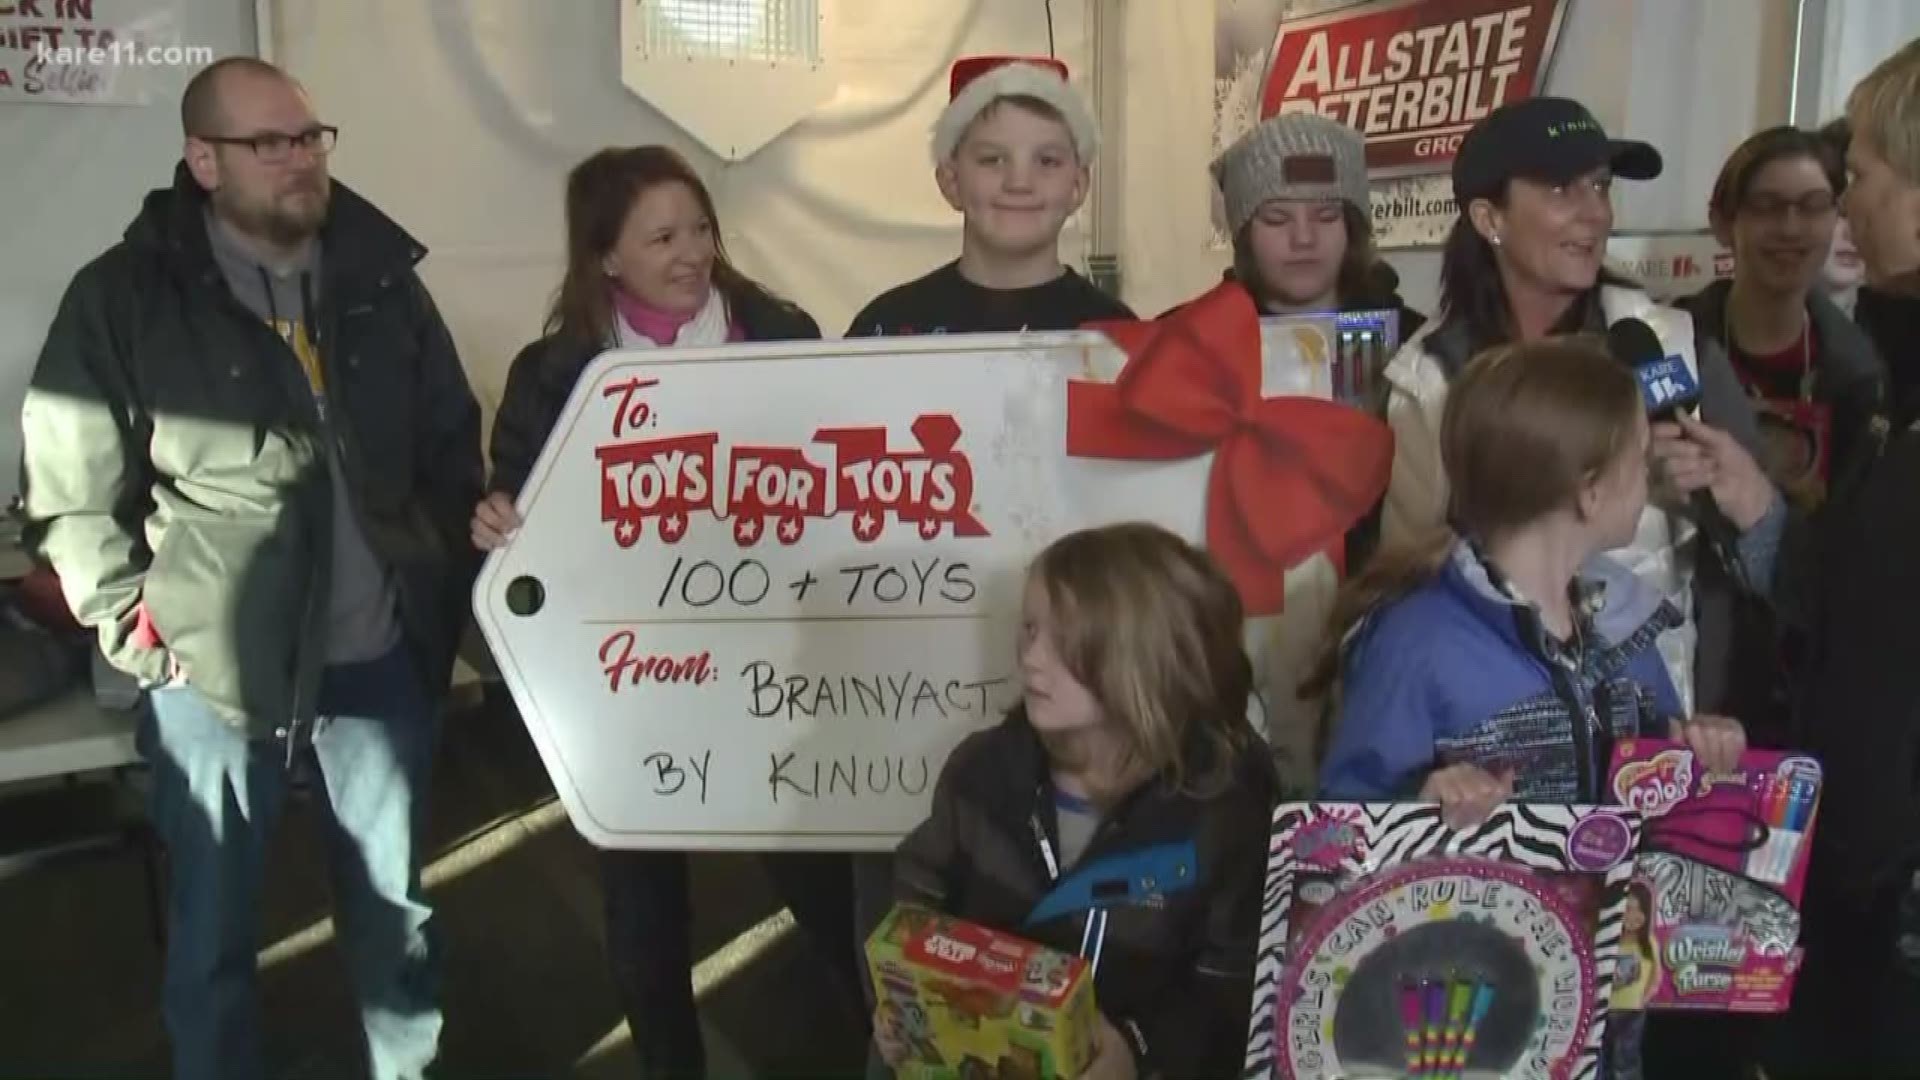 Brainyact and the Blaine B1 Bantams brought in some toys for tots.